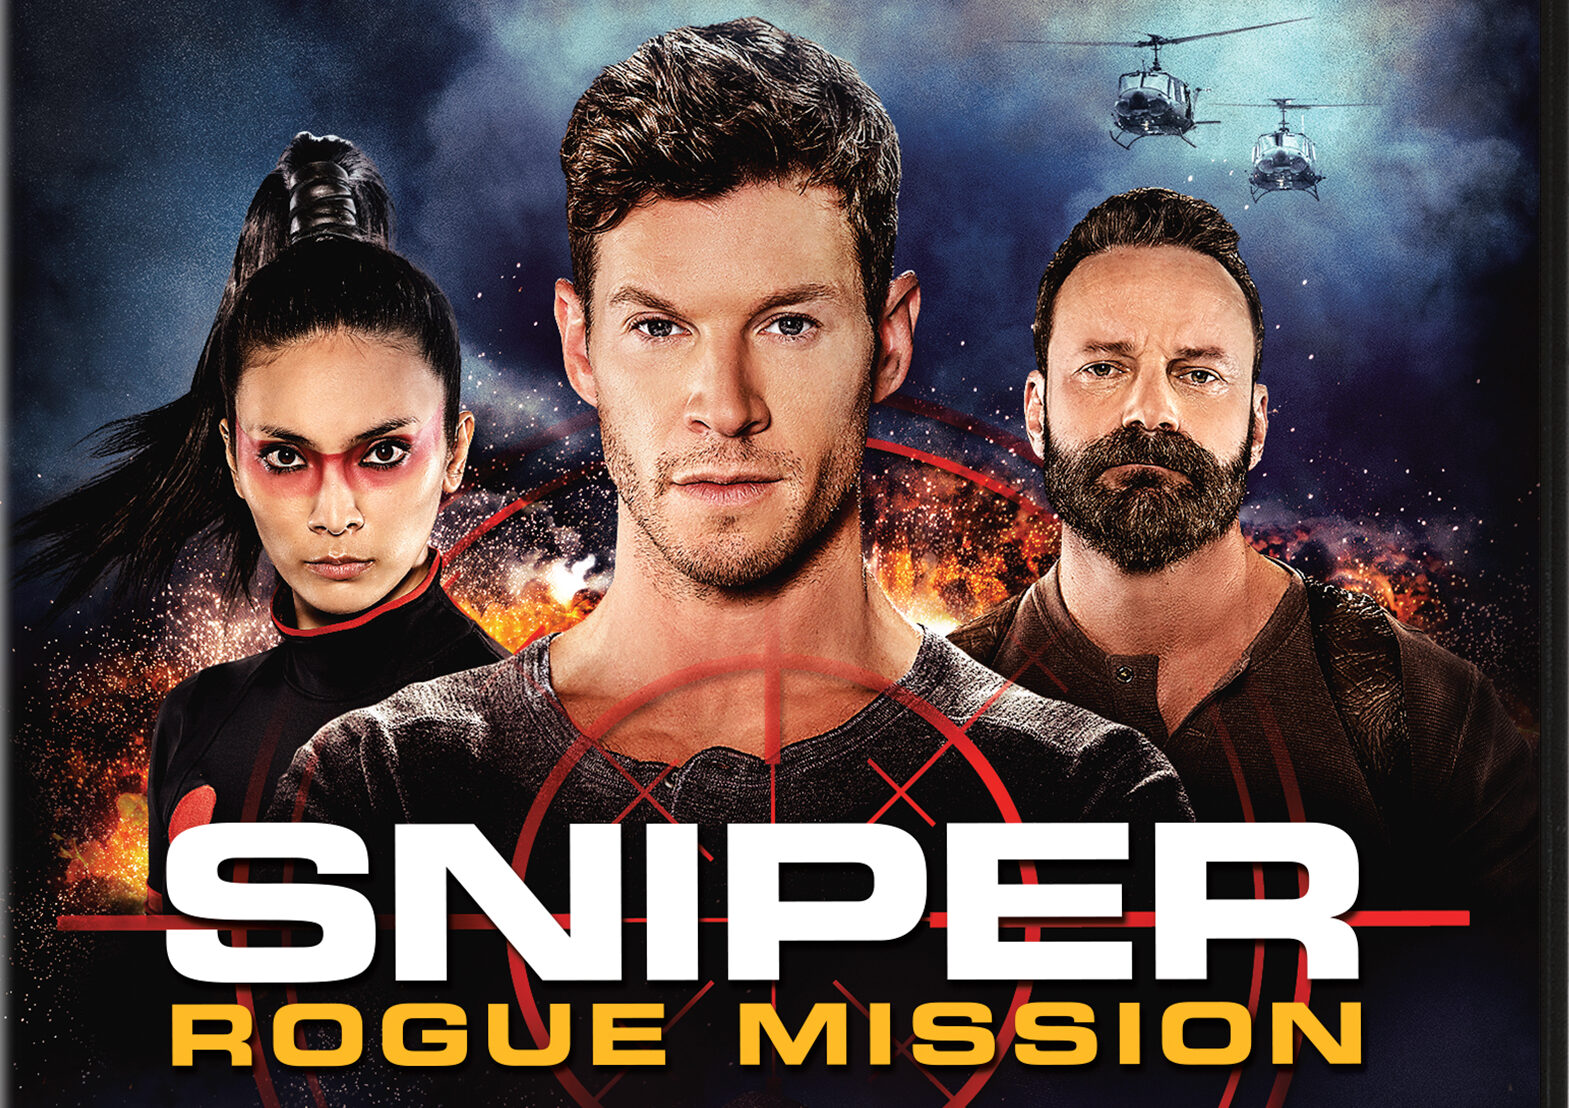 The Sniper Films Return With Sniper: Rogue Mission New Trailer